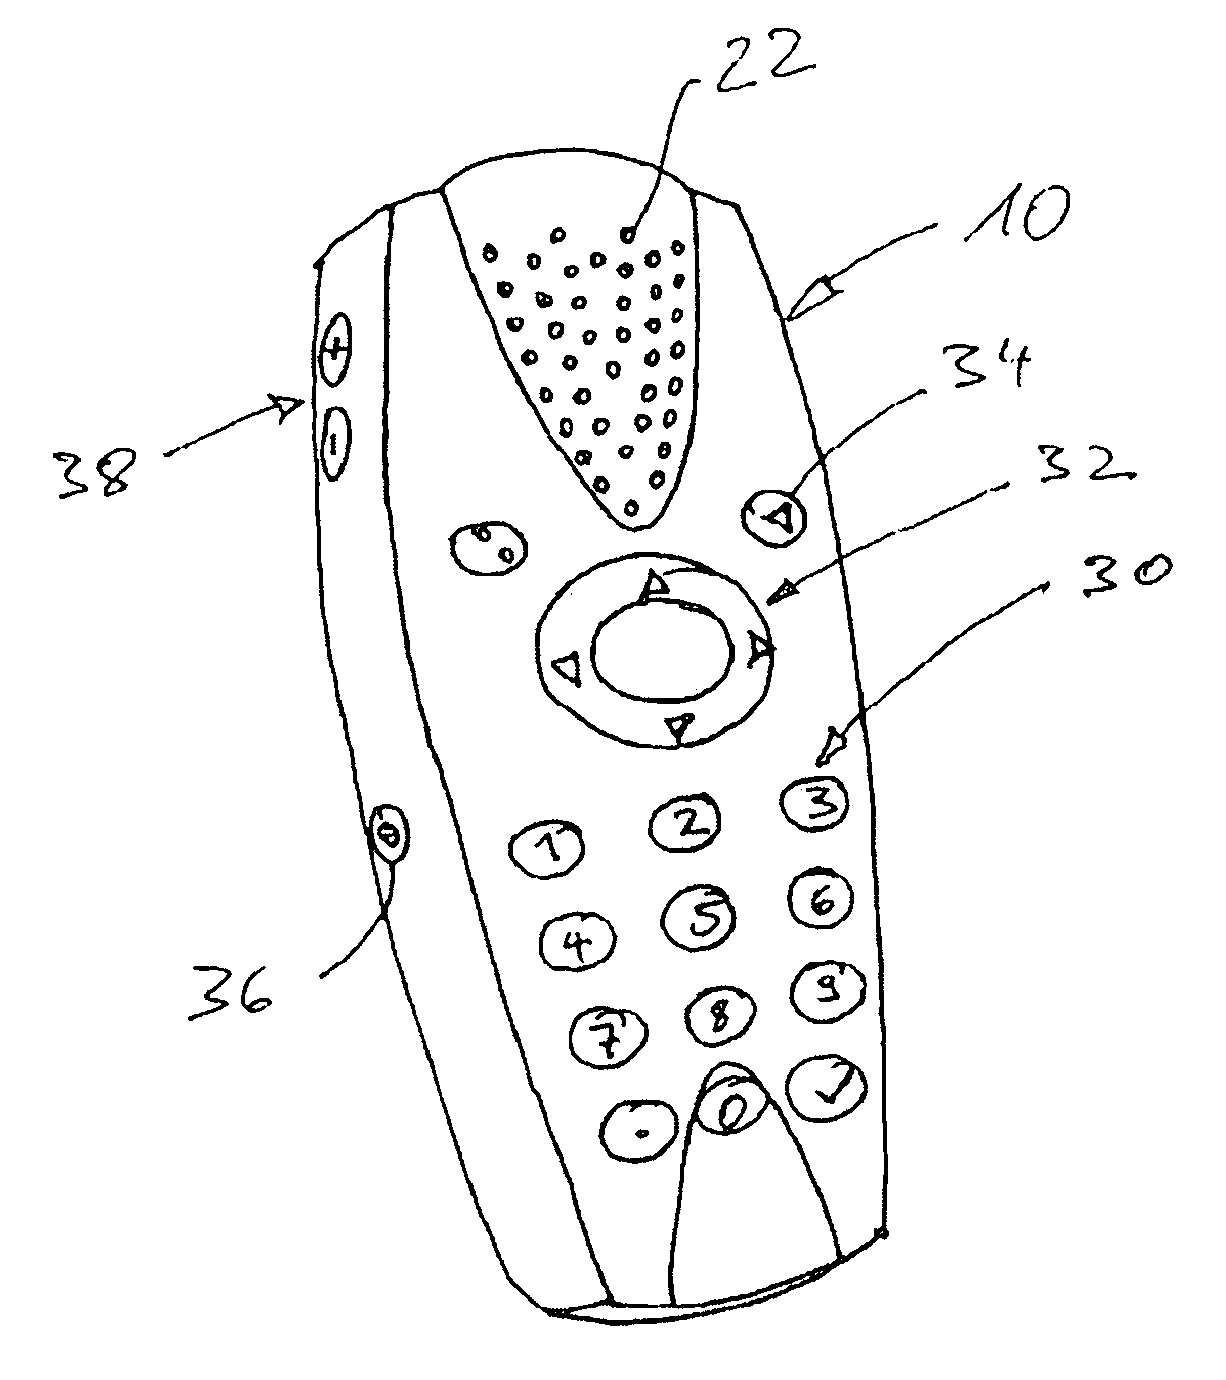 Voice output device and method for spoken text generation